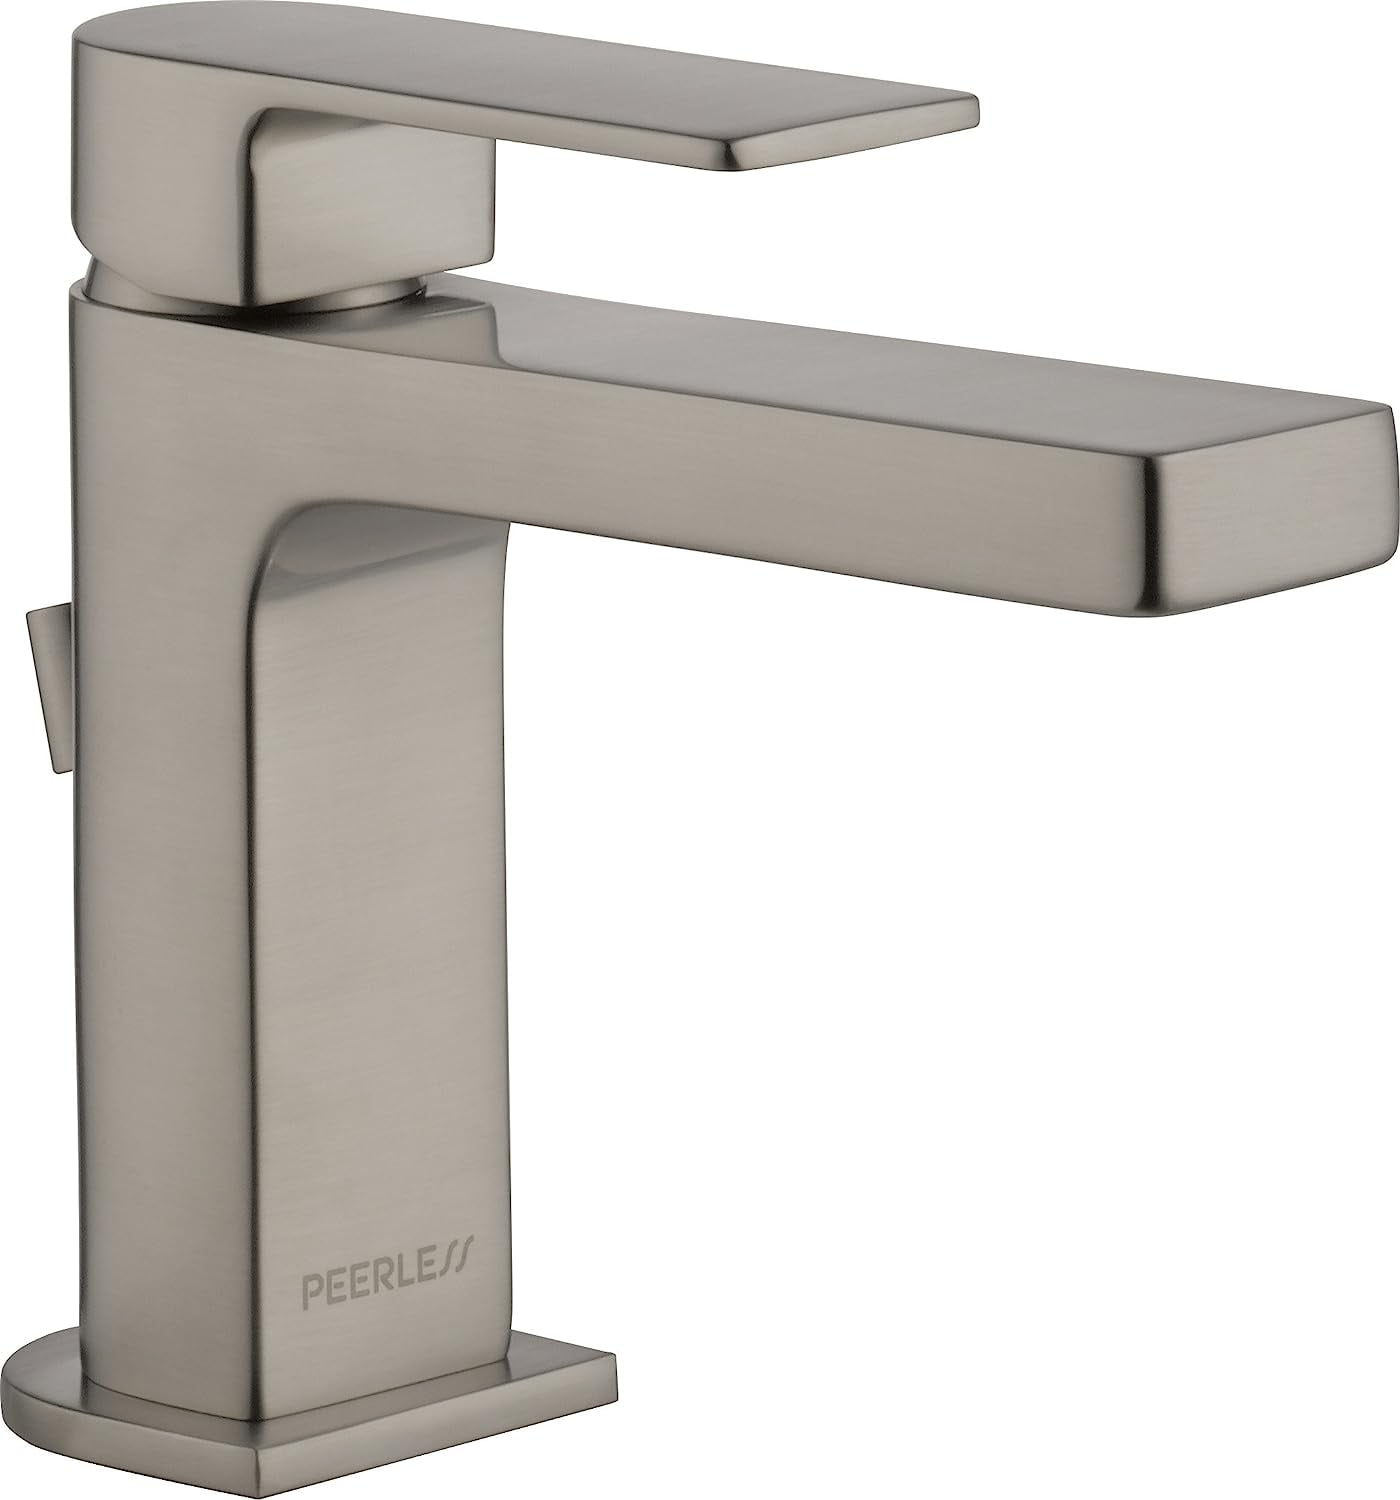 Peerless Single Handle Lav Faucet in Brushed Nickel Recommended for Use in Bathroom